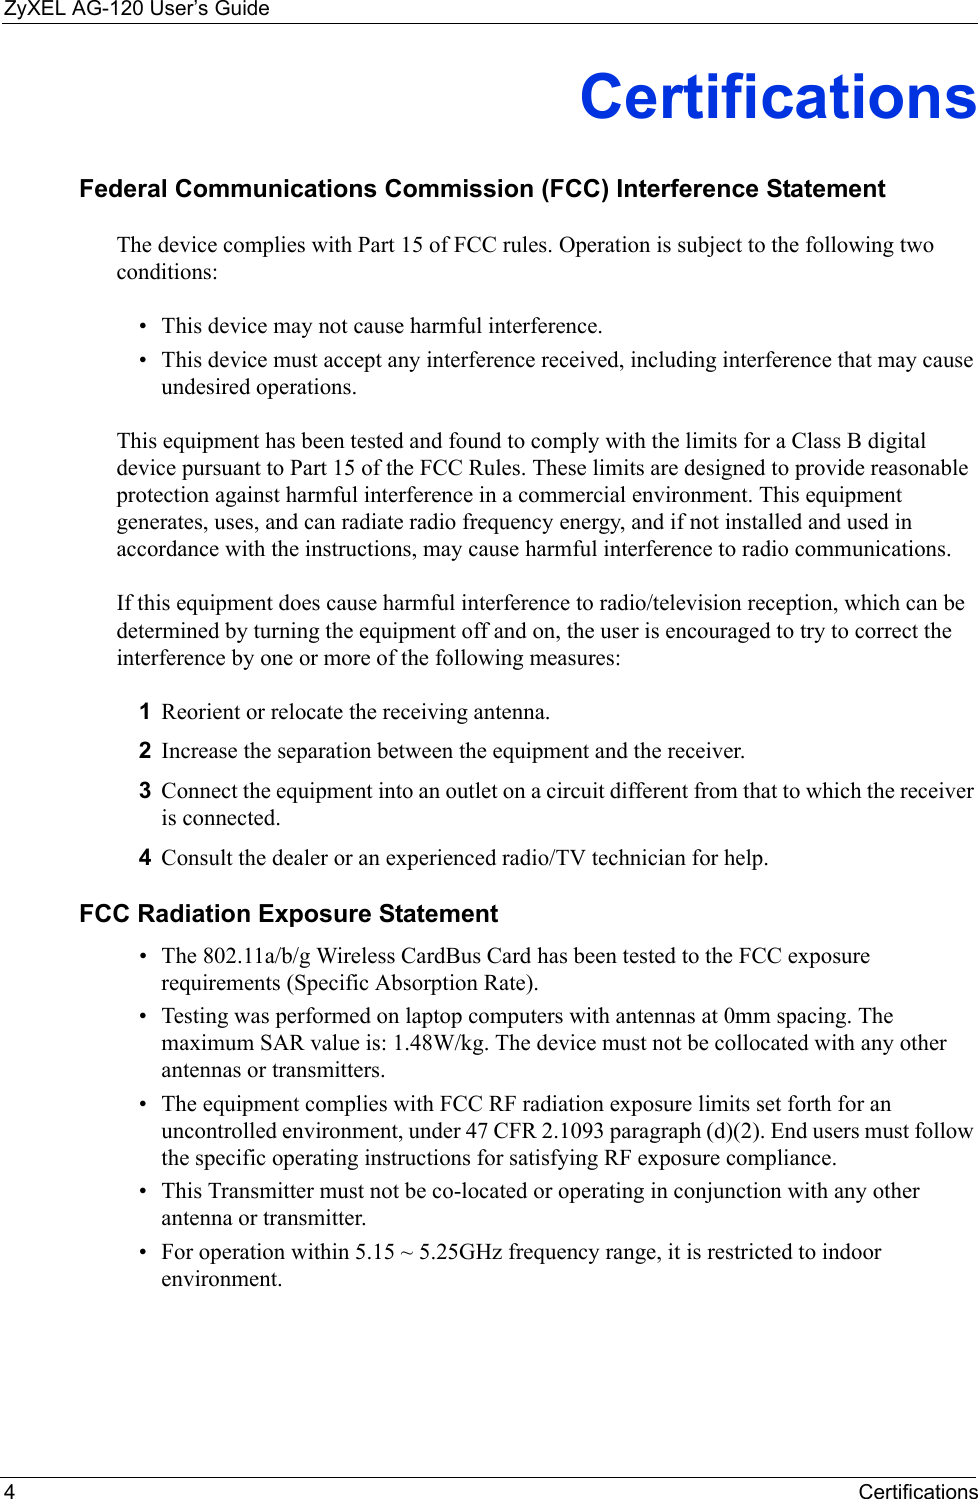 ZyXEL AG-120 User’s Guide4CertificationsCertificationsFederal Communications Commission (FCC) Interference StatementThe device complies with Part 15 of FCC rules. Operation is subject to the following two conditions:• This device may not cause harmful interference.• This device must accept any interference received, including interference that may cause undesired operations.This equipment has been tested and found to comply with the limits for a Class B digital device pursuant to Part 15 of the FCC Rules. These limits are designed to provide reasonable protection against harmful interference in a commercial environment. This equipment generates, uses, and can radiate radio frequency energy, and if not installed and used in accordance with the instructions, may cause harmful interference to radio communications.If this equipment does cause harmful interference to radio/television reception, which can be determined by turning the equipment off and on, the user is encouraged to try to correct the interference by one or more of the following measures:1Reorient or relocate the receiving antenna.2Increase the separation between the equipment and the receiver.3Connect the equipment into an outlet on a circuit different from that to which the receiver is connected.4Consult the dealer or an experienced radio/TV technician for help.FCC Radiation Exposure Statement• The 802.11a/b/g Wireless CardBus Card has been tested to the FCC exposure requirements (Specific Absorption Rate). • Testing was performed on laptop computers with antennas at 0mm spacing. The maximum SAR value is: 1.48W/kg. The device must not be collocated with any other antennas or transmitters.• The equipment complies with FCC RF radiation exposure limits set forth for an uncontrolled environment, under 47 CFR 2.1093 paragraph (d)(2). End users must follow the specific operating instructions for satisfying RF exposure compliance. • This Transmitter must not be co-located or operating in conjunction with any other antenna or transmitter. • For operation within 5.15 ~ 5.25GHz frequency range, it is restricted to indoor environment. 